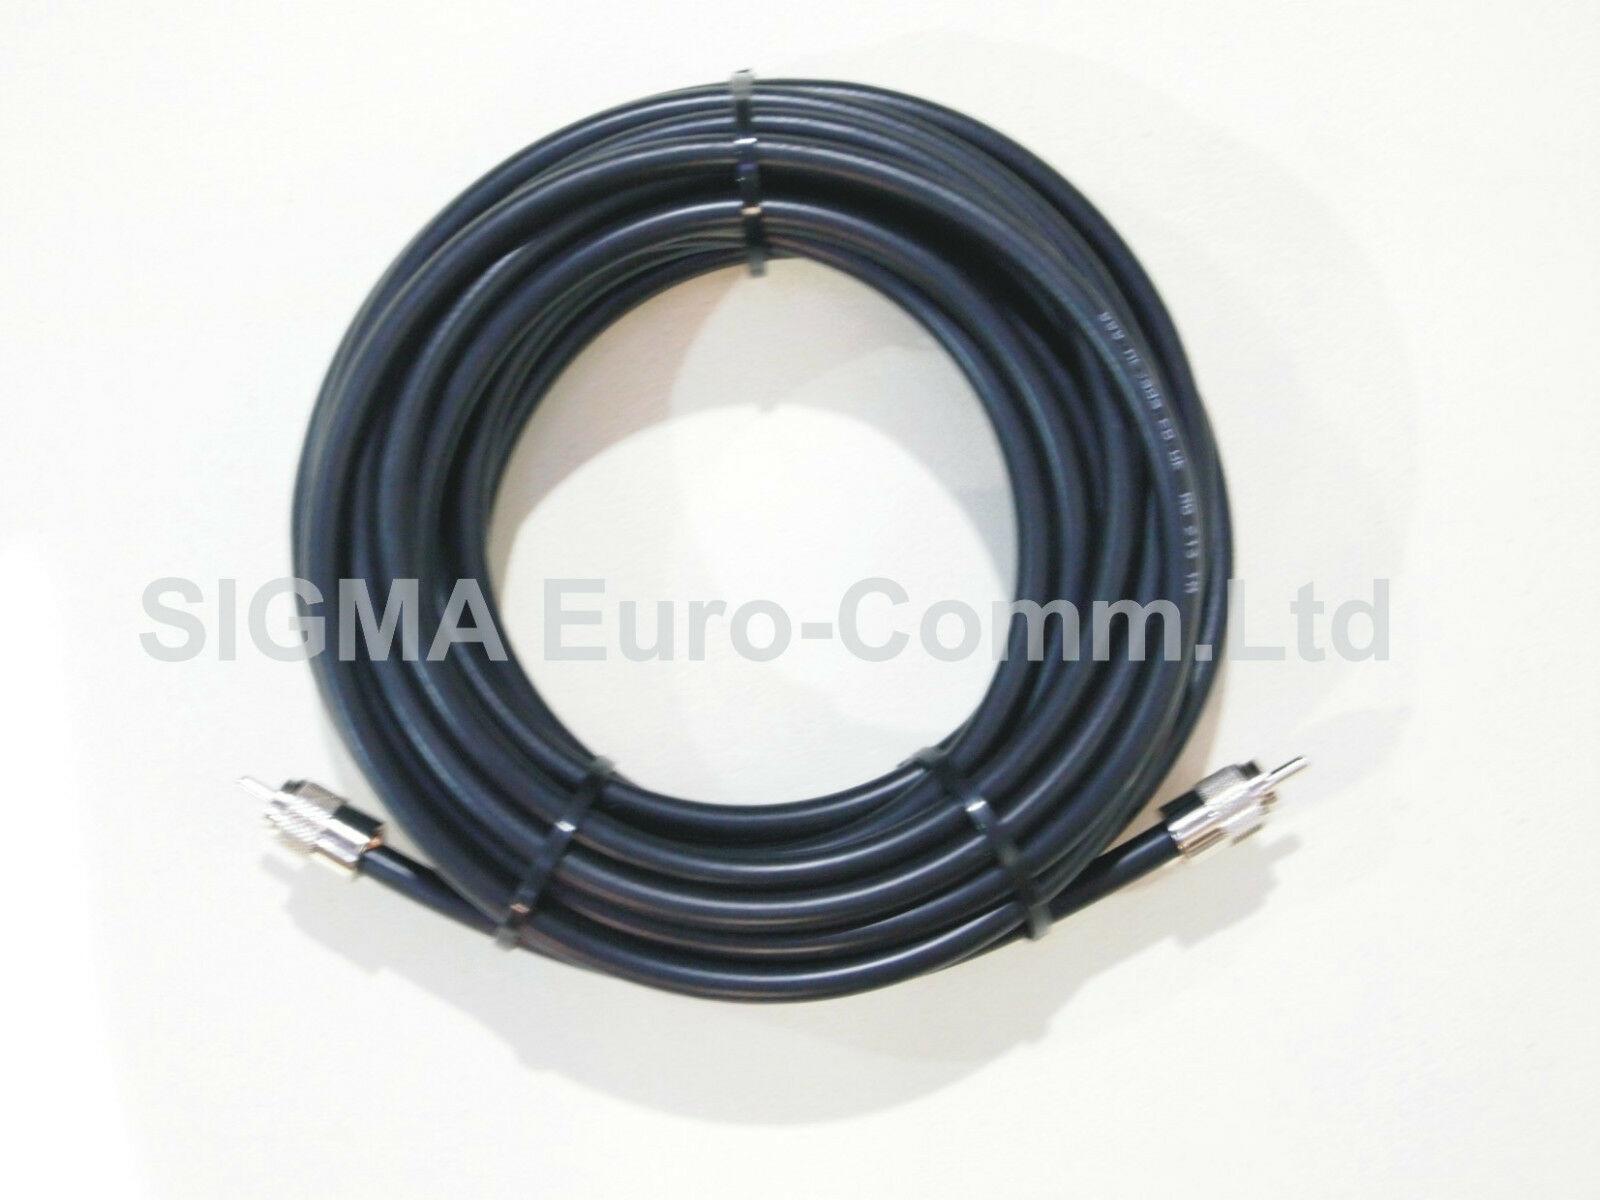 Sigma RG213 Low Loss 50 Ohm Coaxial Cable 4m Fitted With 2 x PL259 Male Connectors